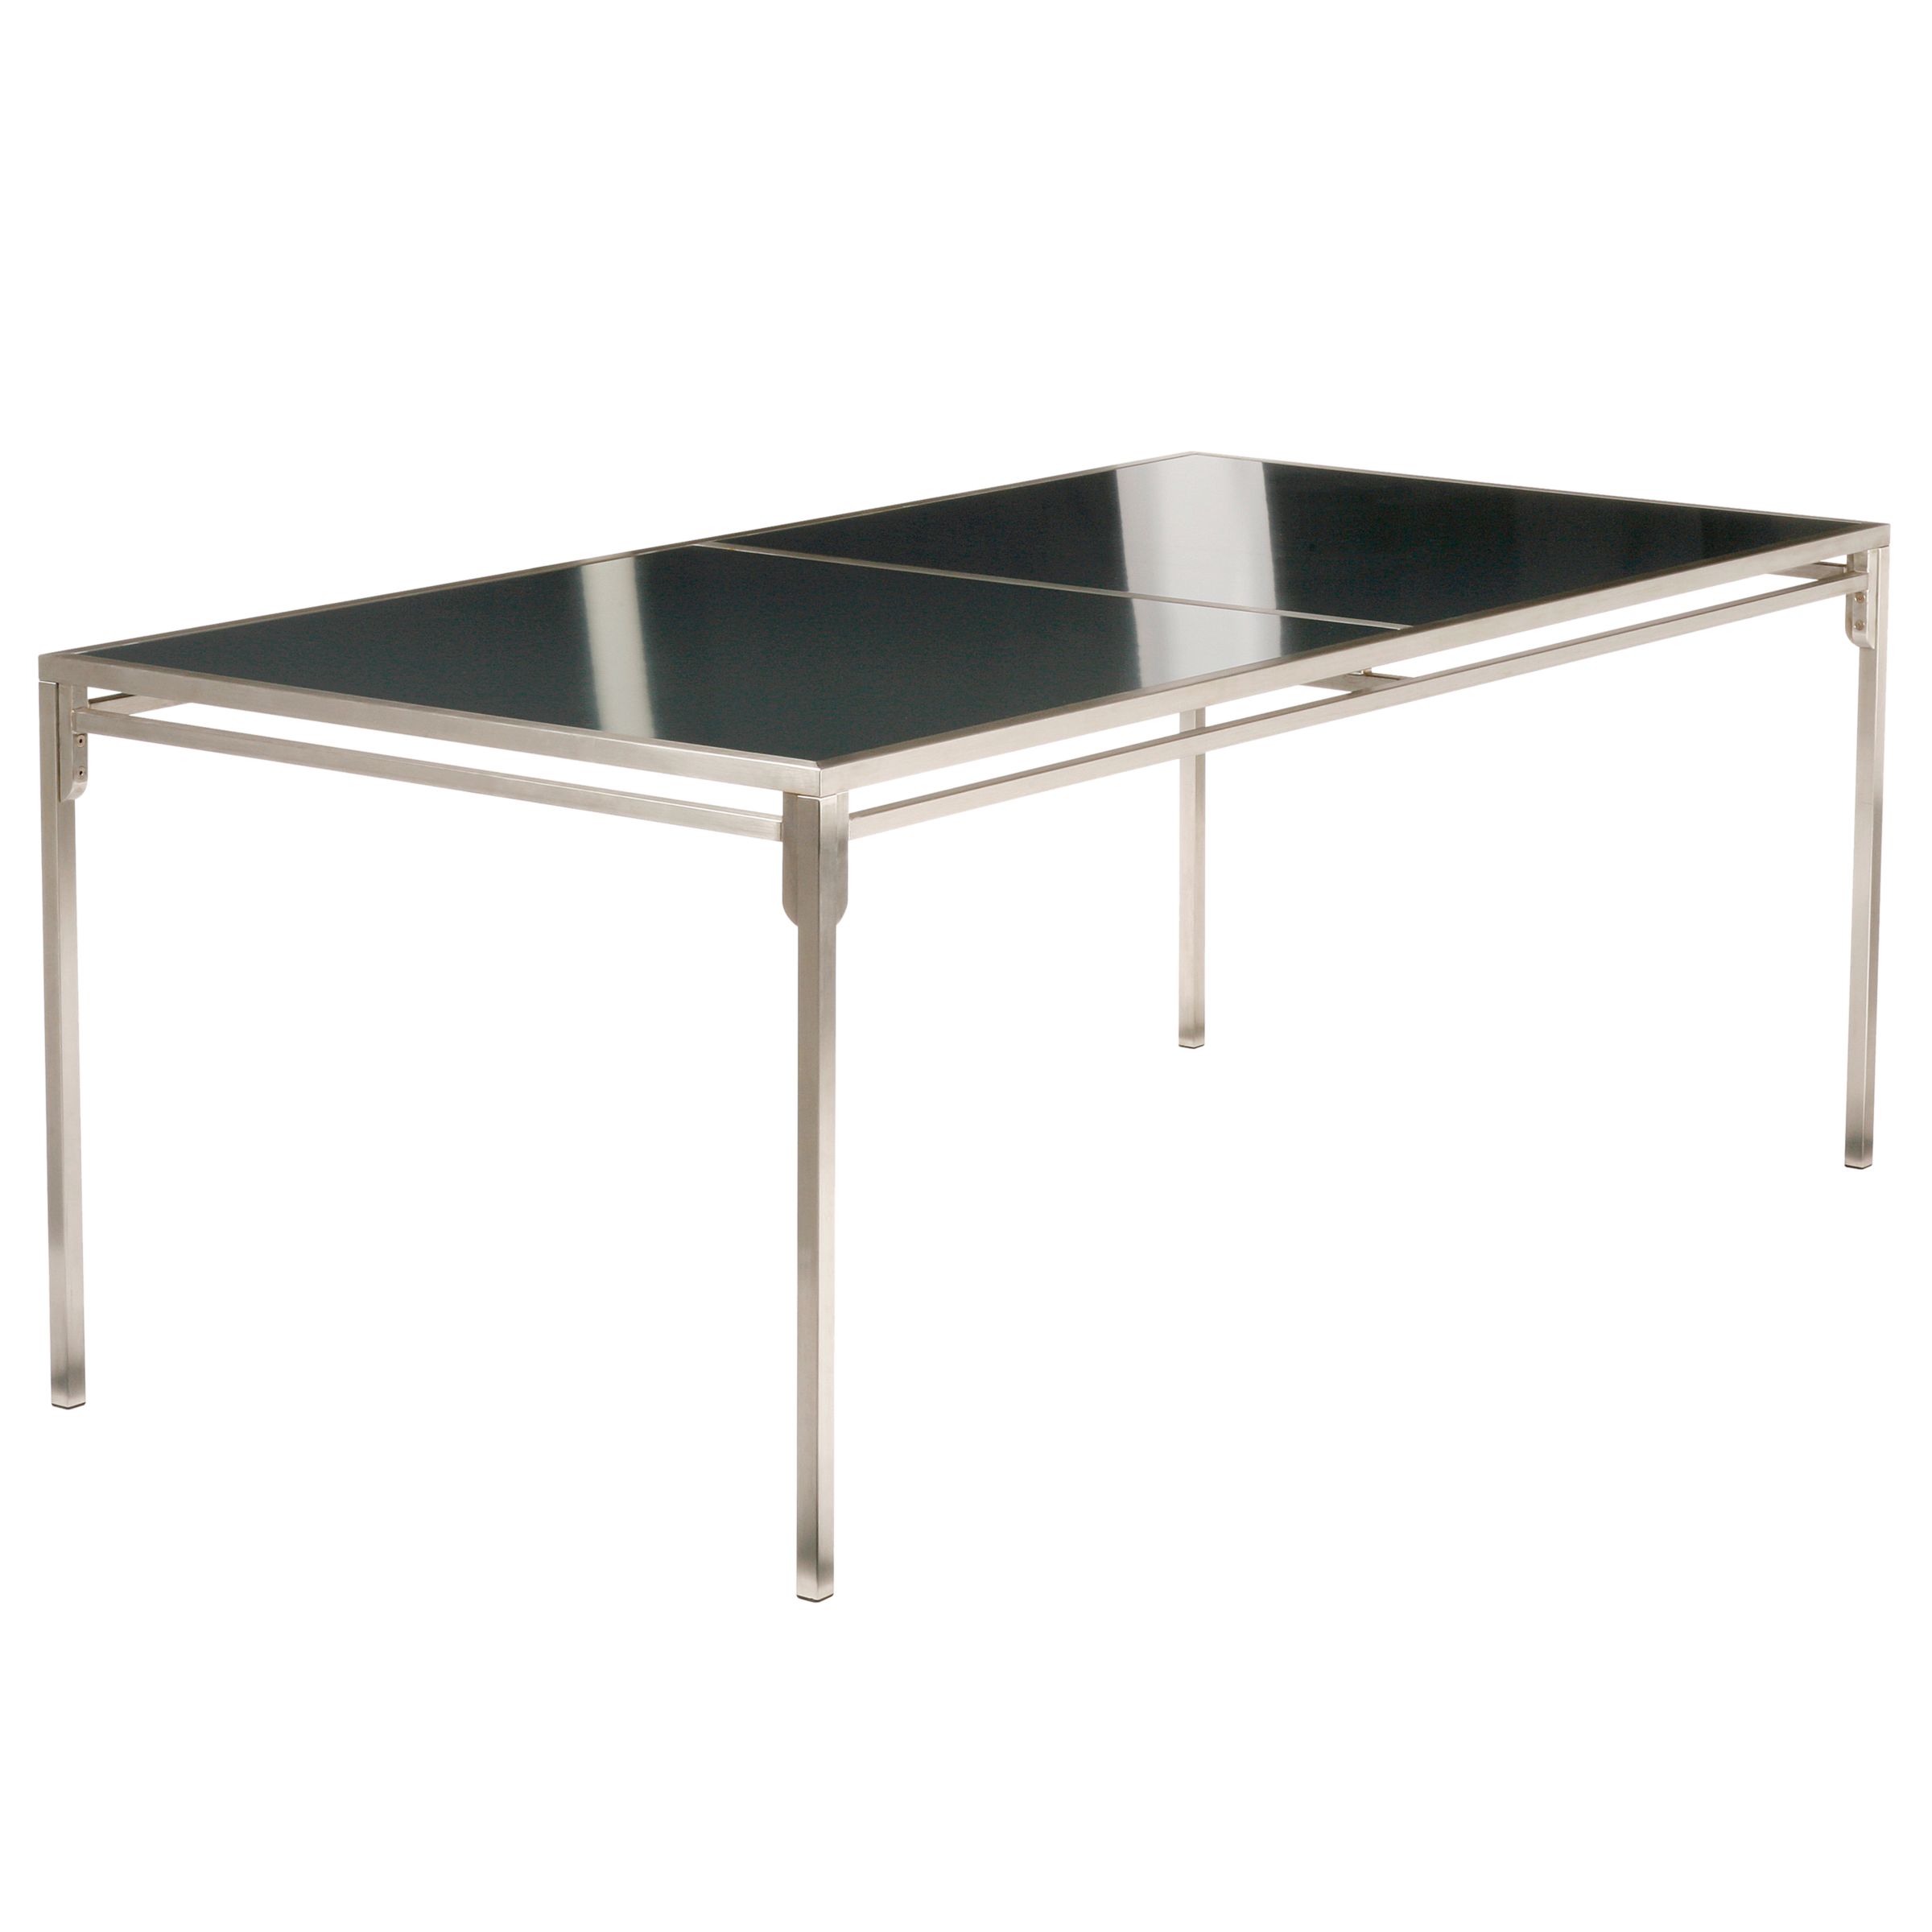 Barlow Tyrie Quattro Dining Table, L188cm